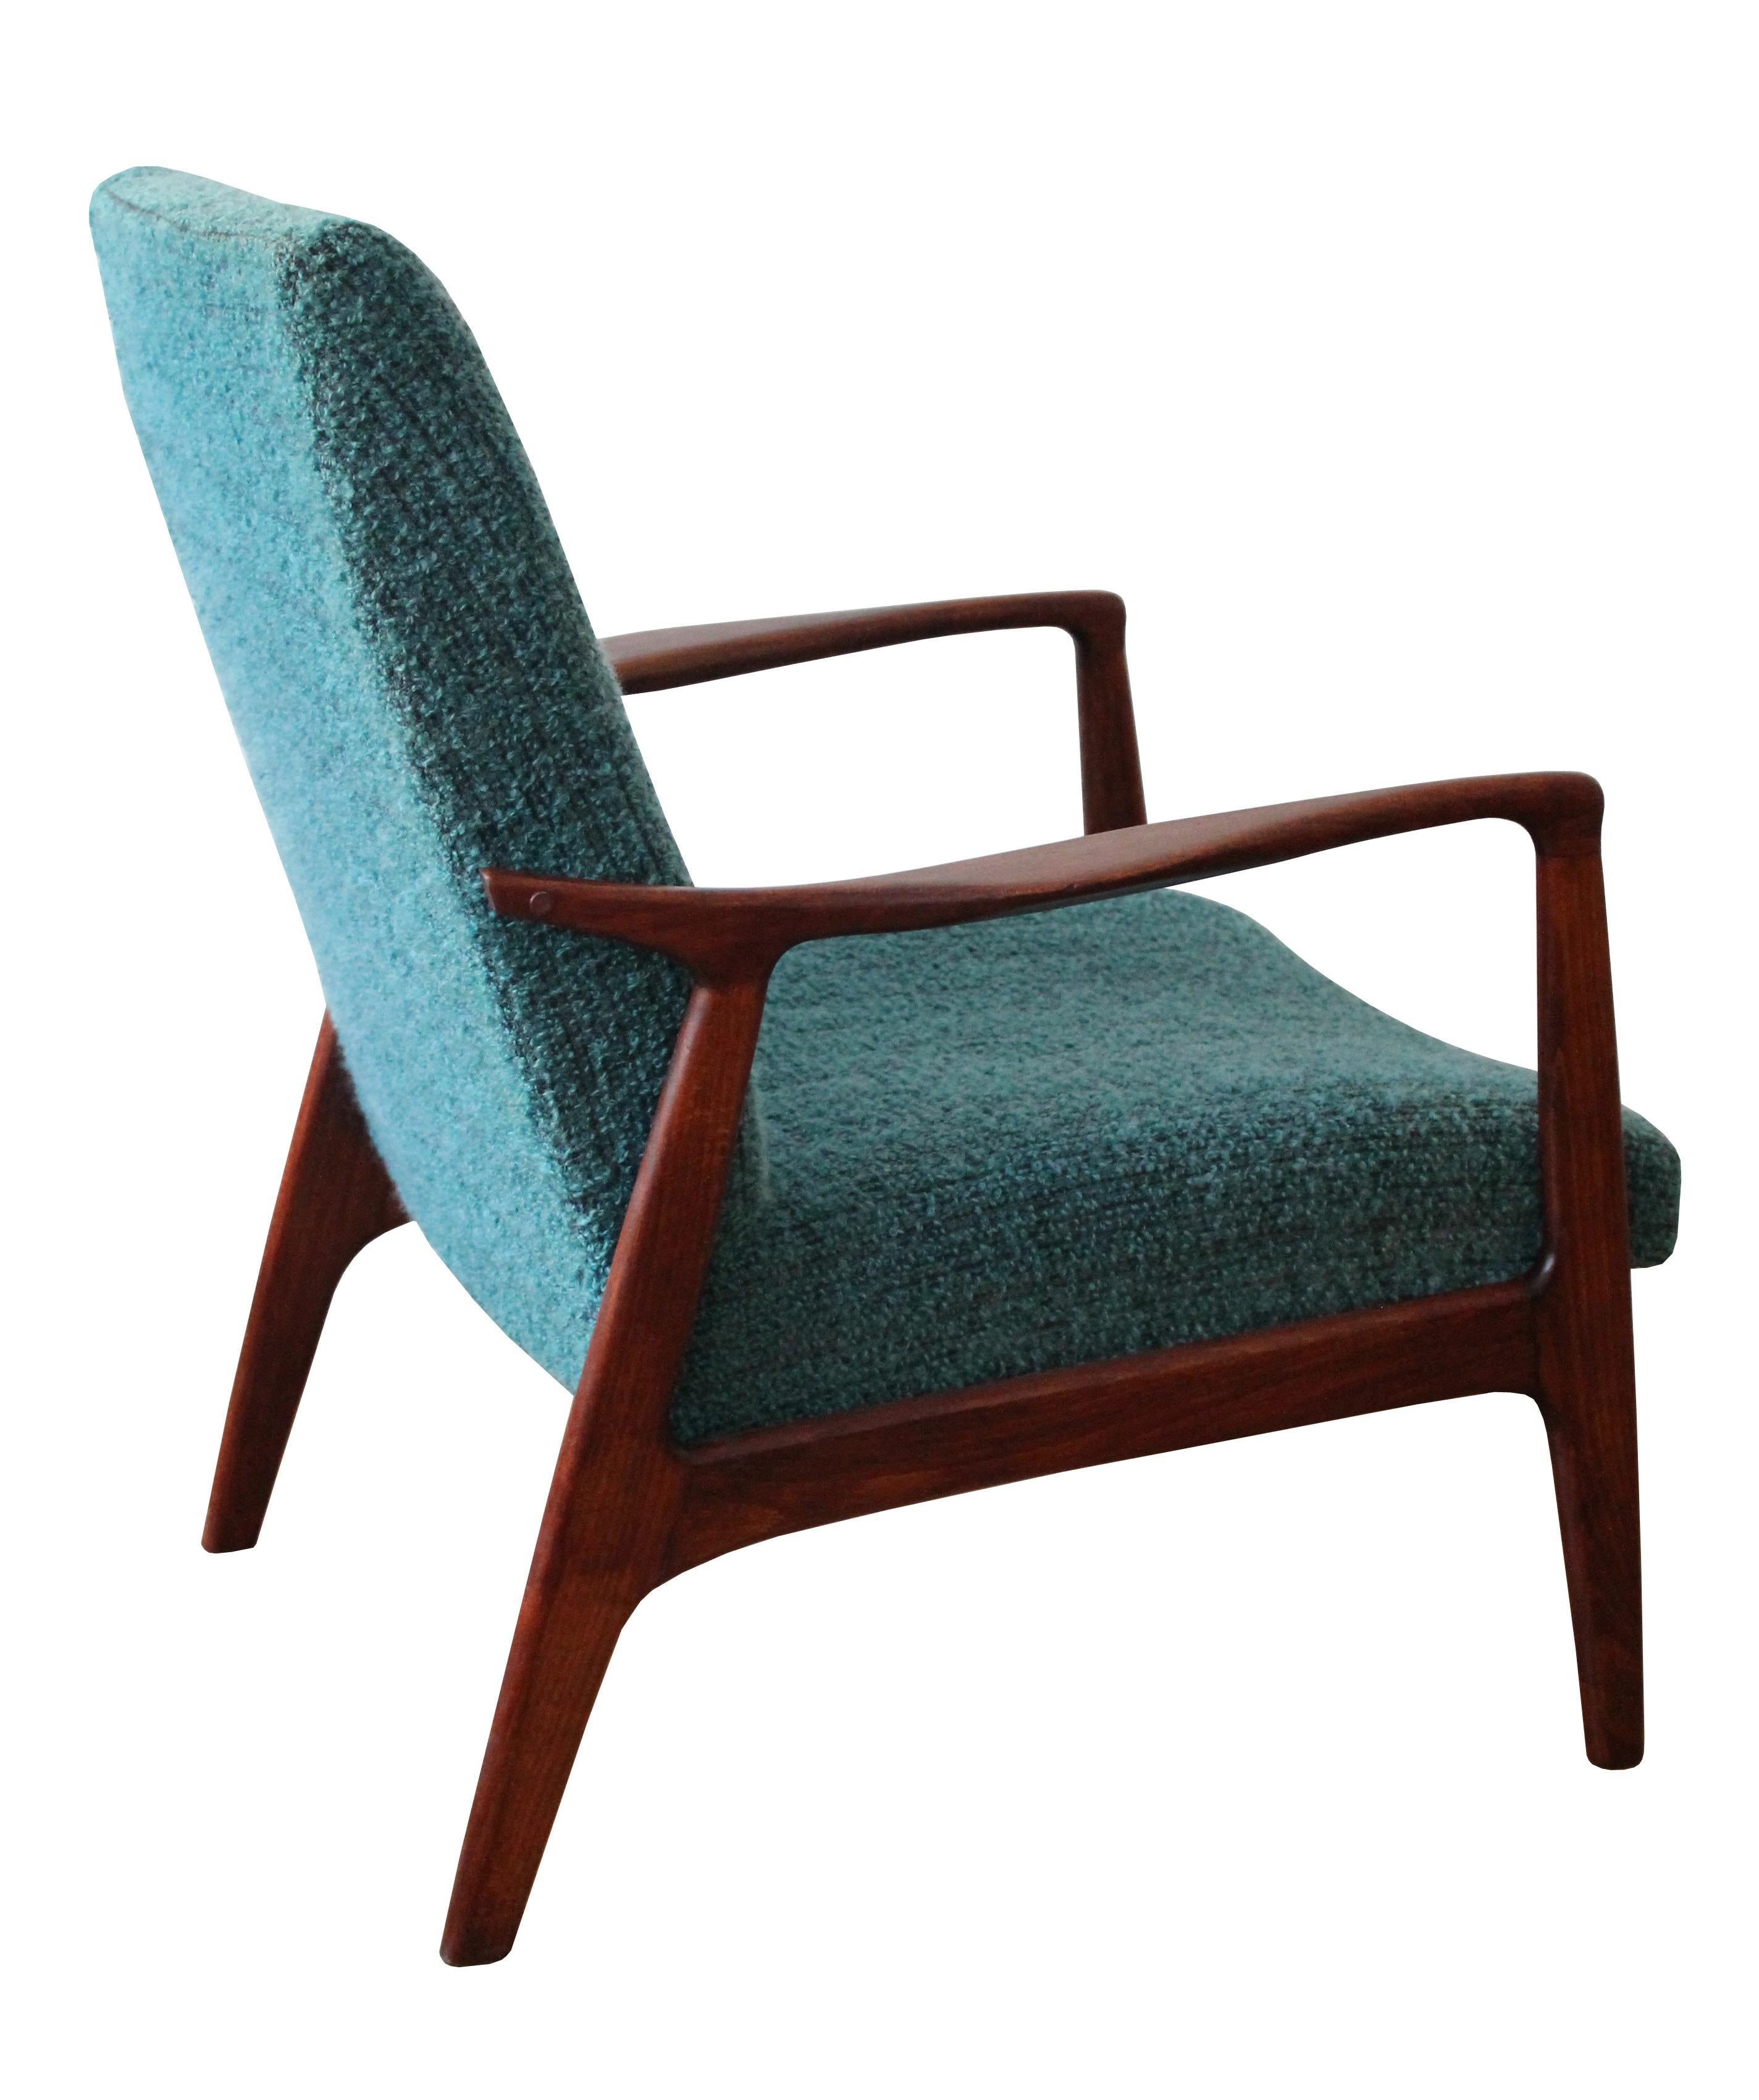 Other Set of two Midcentury Armchairs